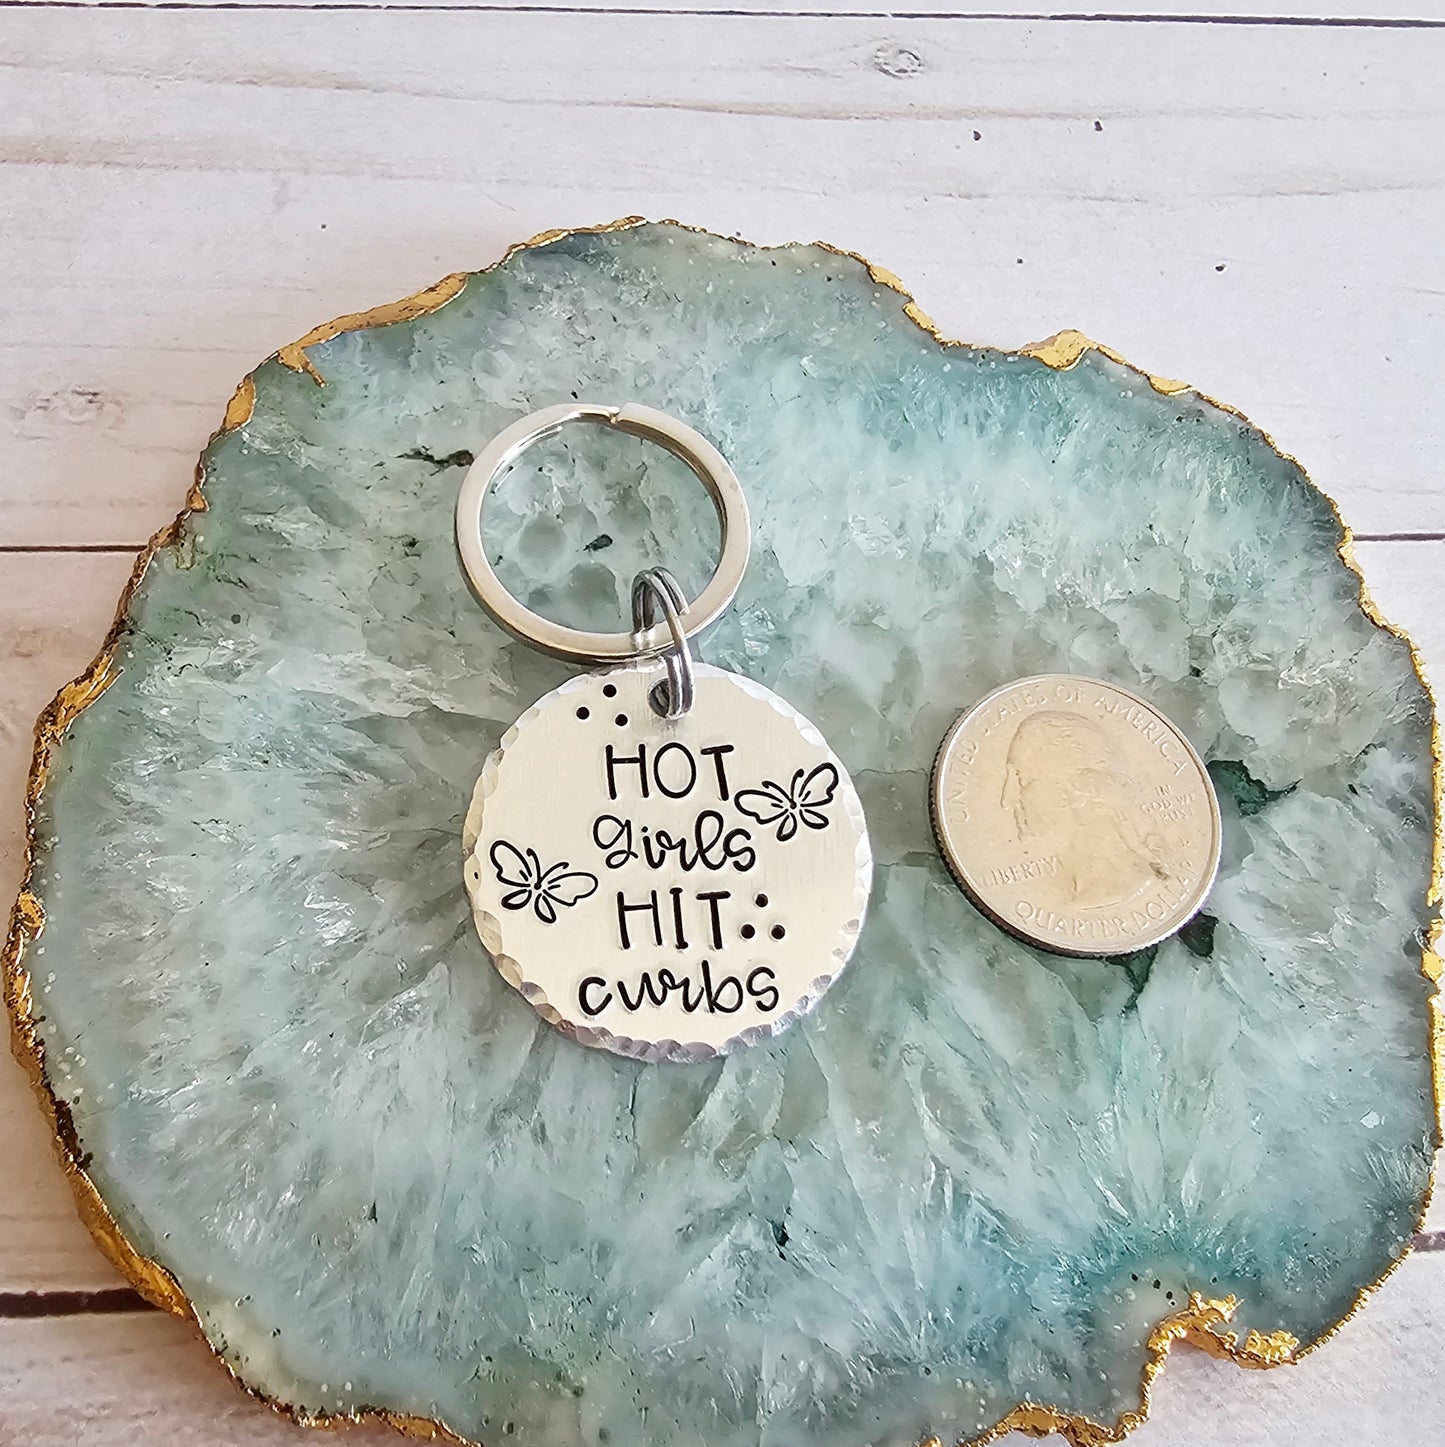 Hot Girls Hit Curbs Funny Handstamped Keychain, Bad Driver Keychains, Funny 18th Birthday Gifts, Cute Xmas Stocking Stuffers for Teens